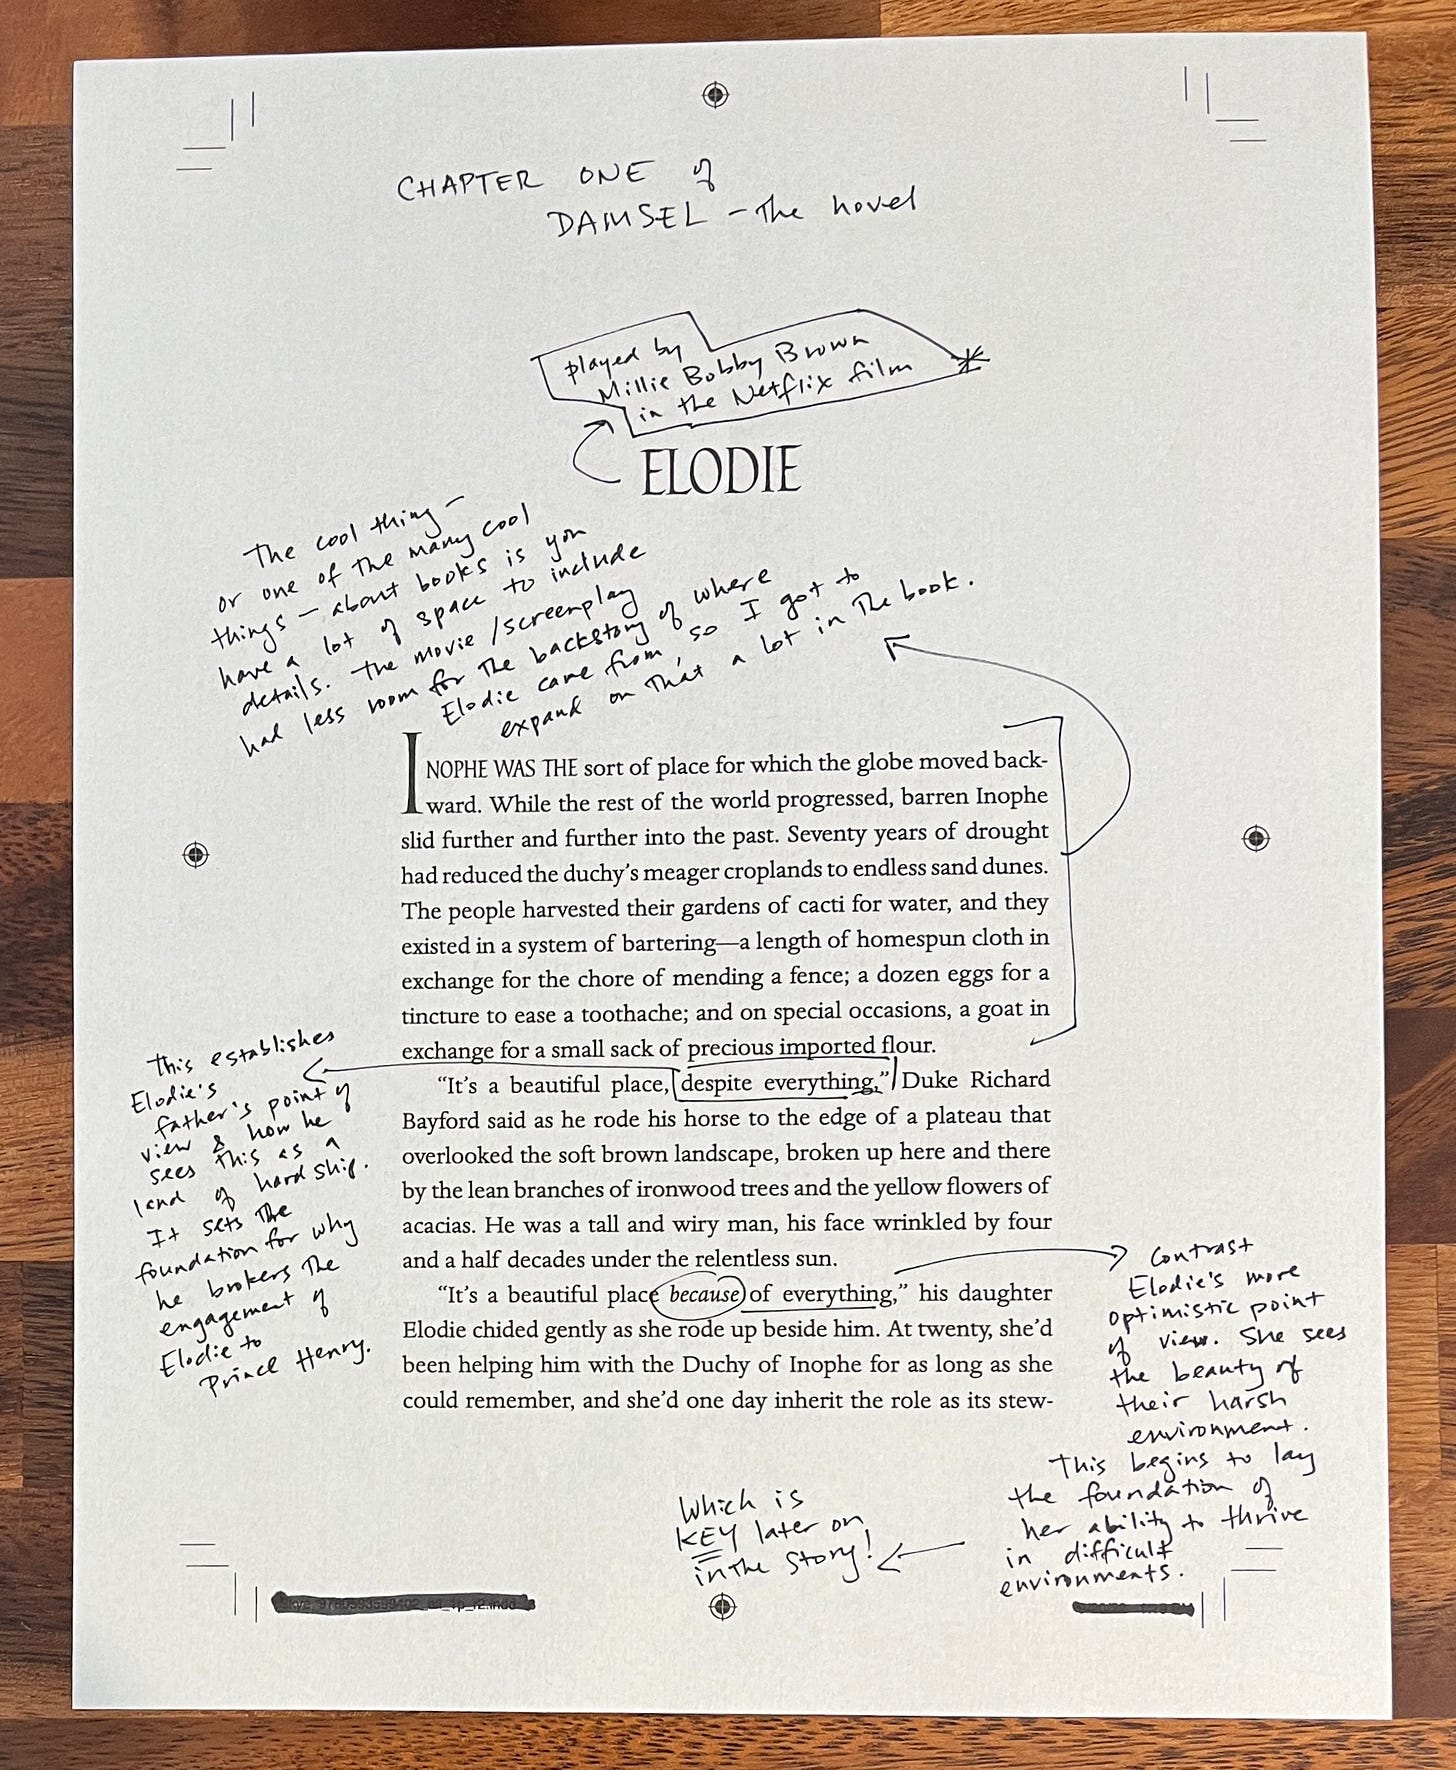 Annotated page from DAMSEL with notes from Evelyn Skye